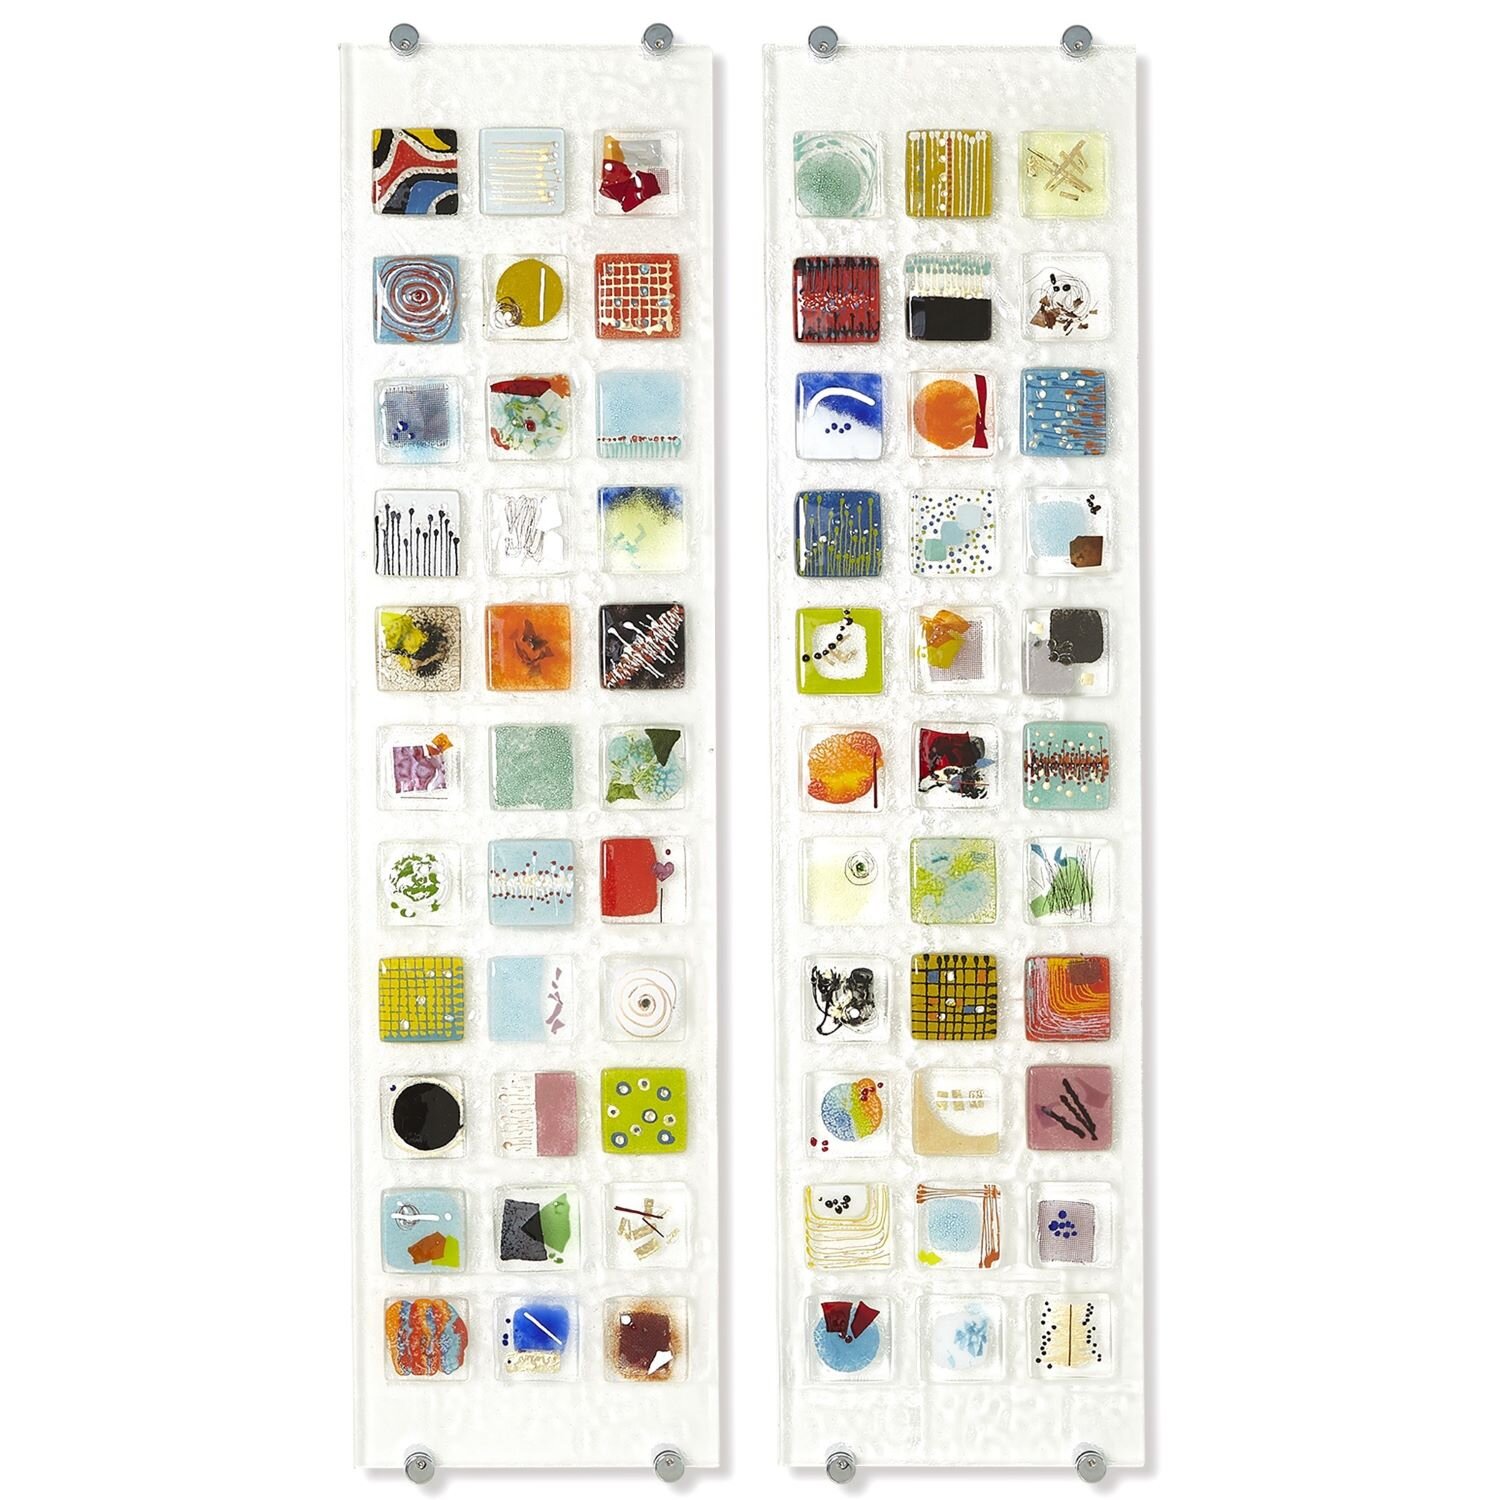 Art glass wall panels, 33 tiles each, no two are alike, made in Portugal, Global Views. 